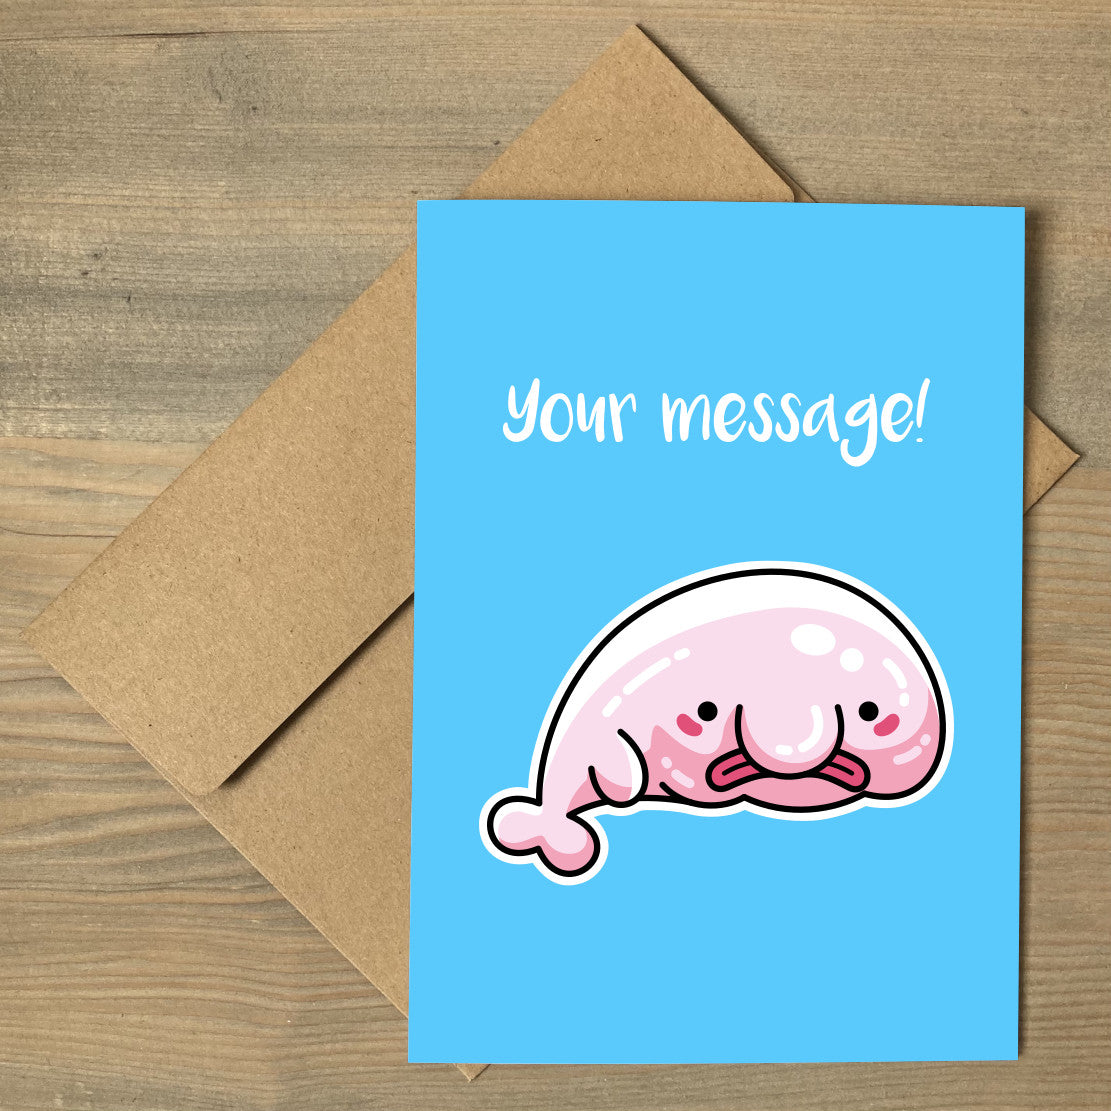 A brown envelope beneath a blue greeting card that features a kawaii cute blobfish with a personalised message above.